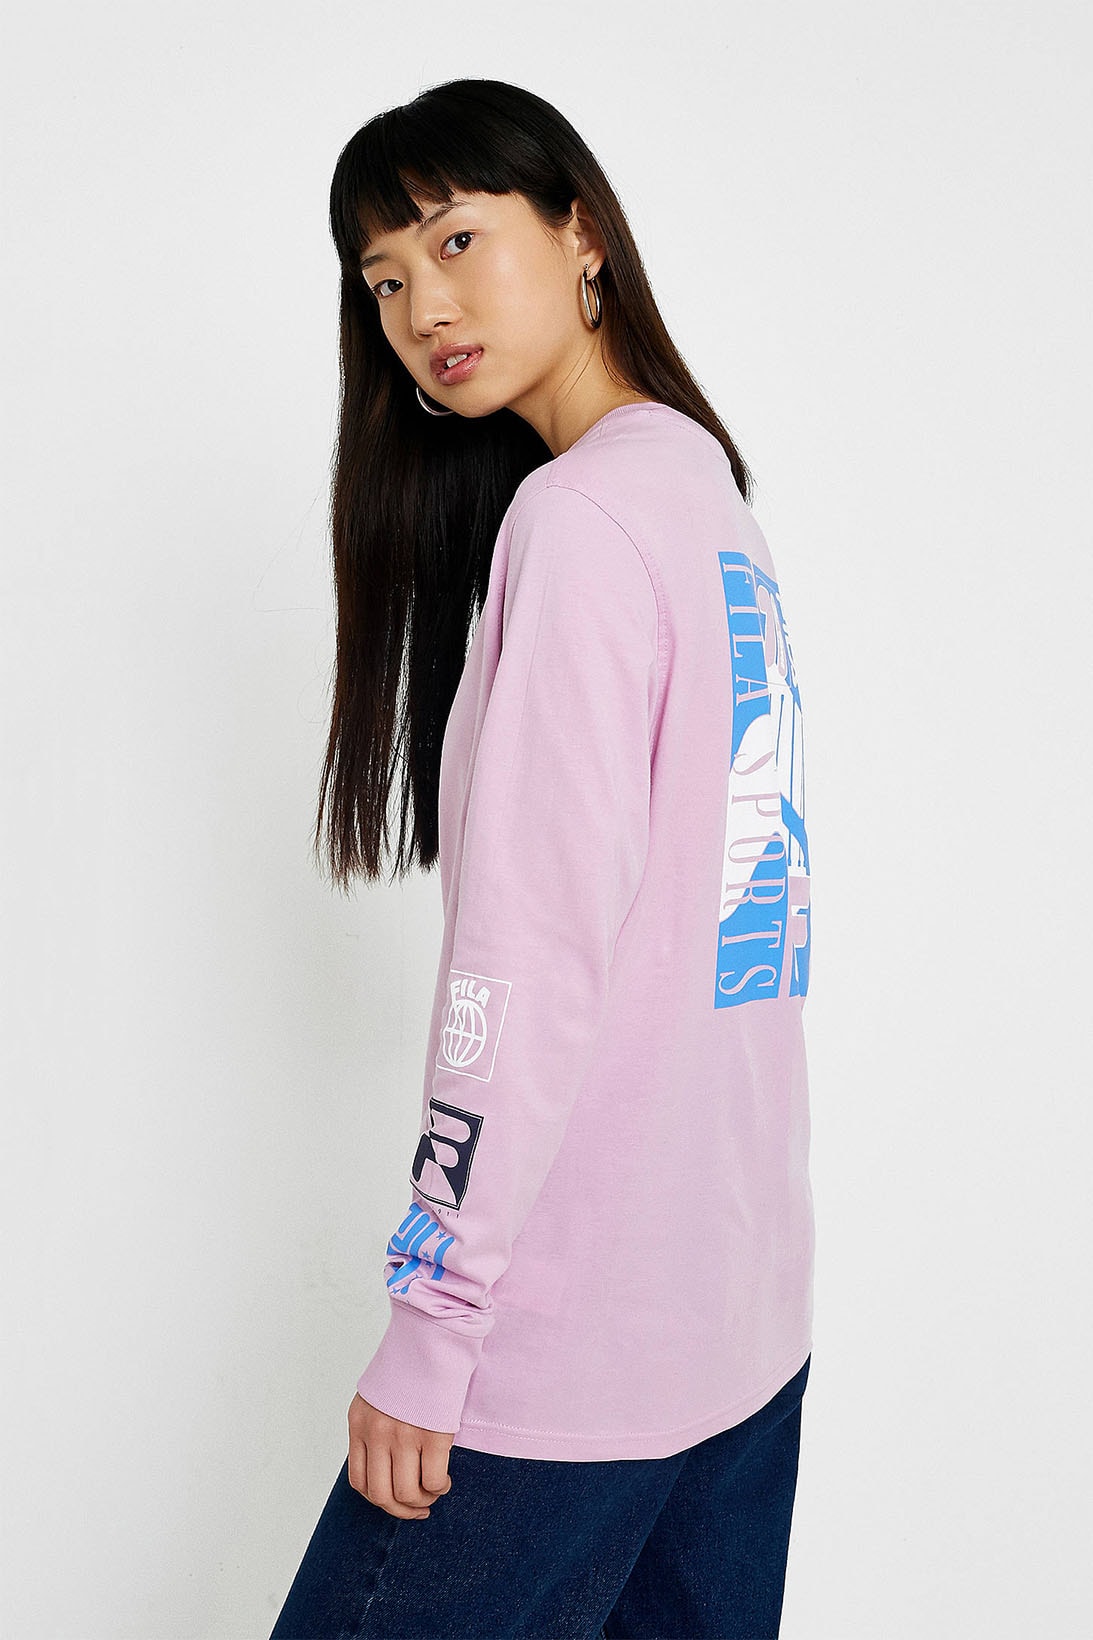 FILA ultra violet light pastel purple pink graphic logo long sleeve top urban outfitters